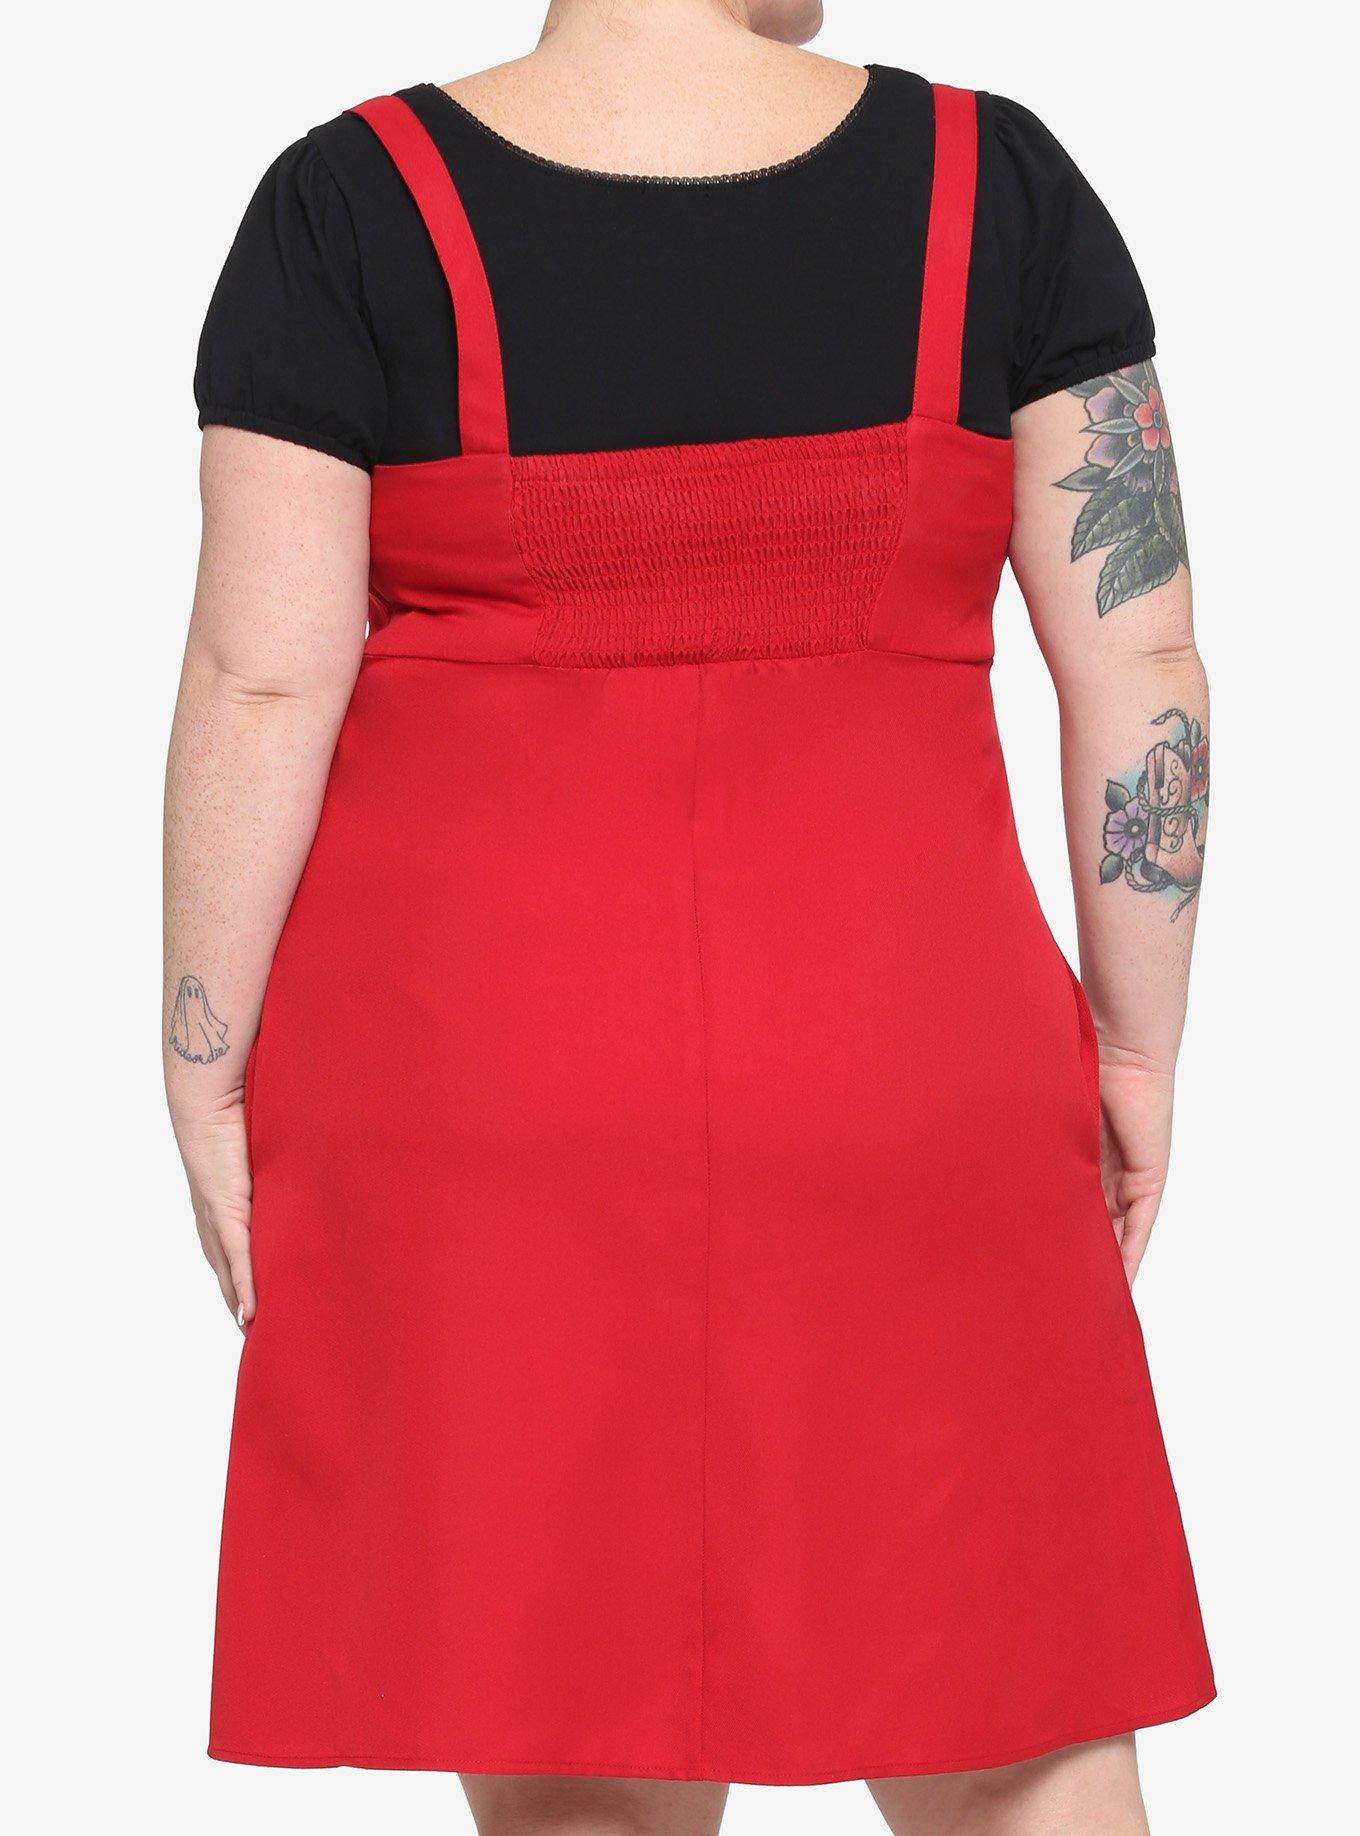 Red Heart Buckle Pinafore Dress Plus Size, RED, alternate